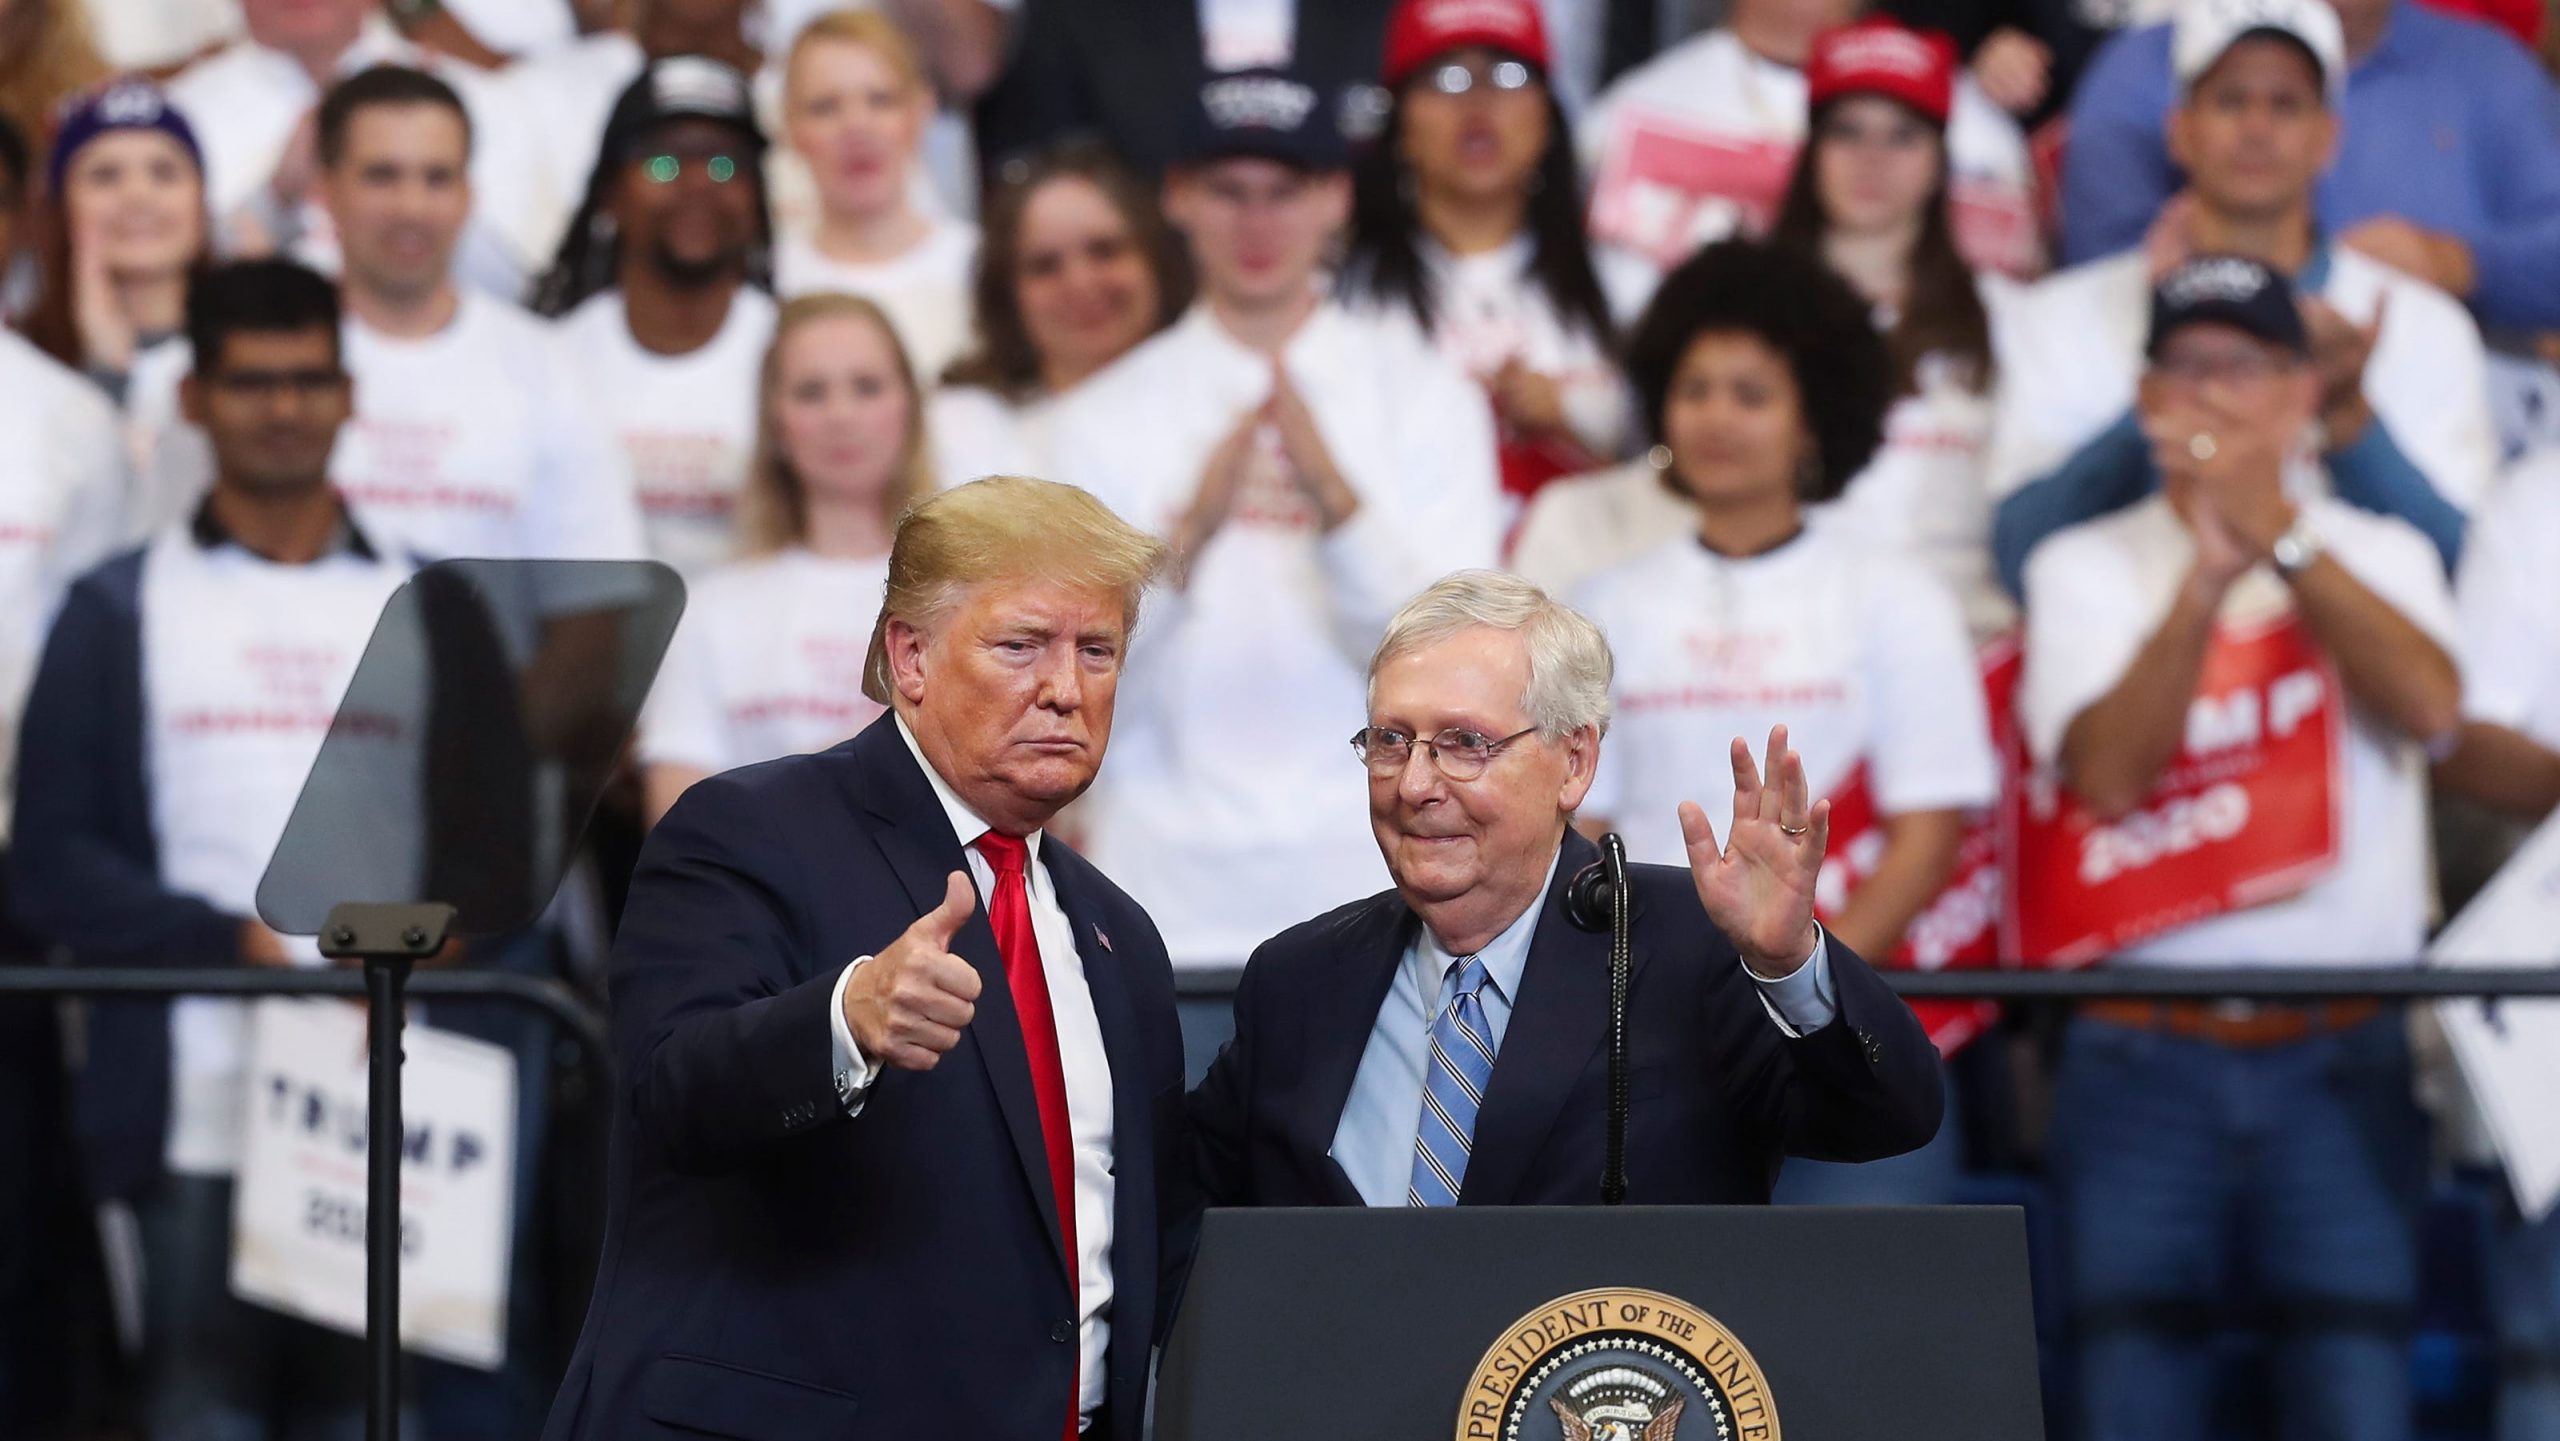 McConnell gets flak from Kentucky Republicans over Trump impeachment